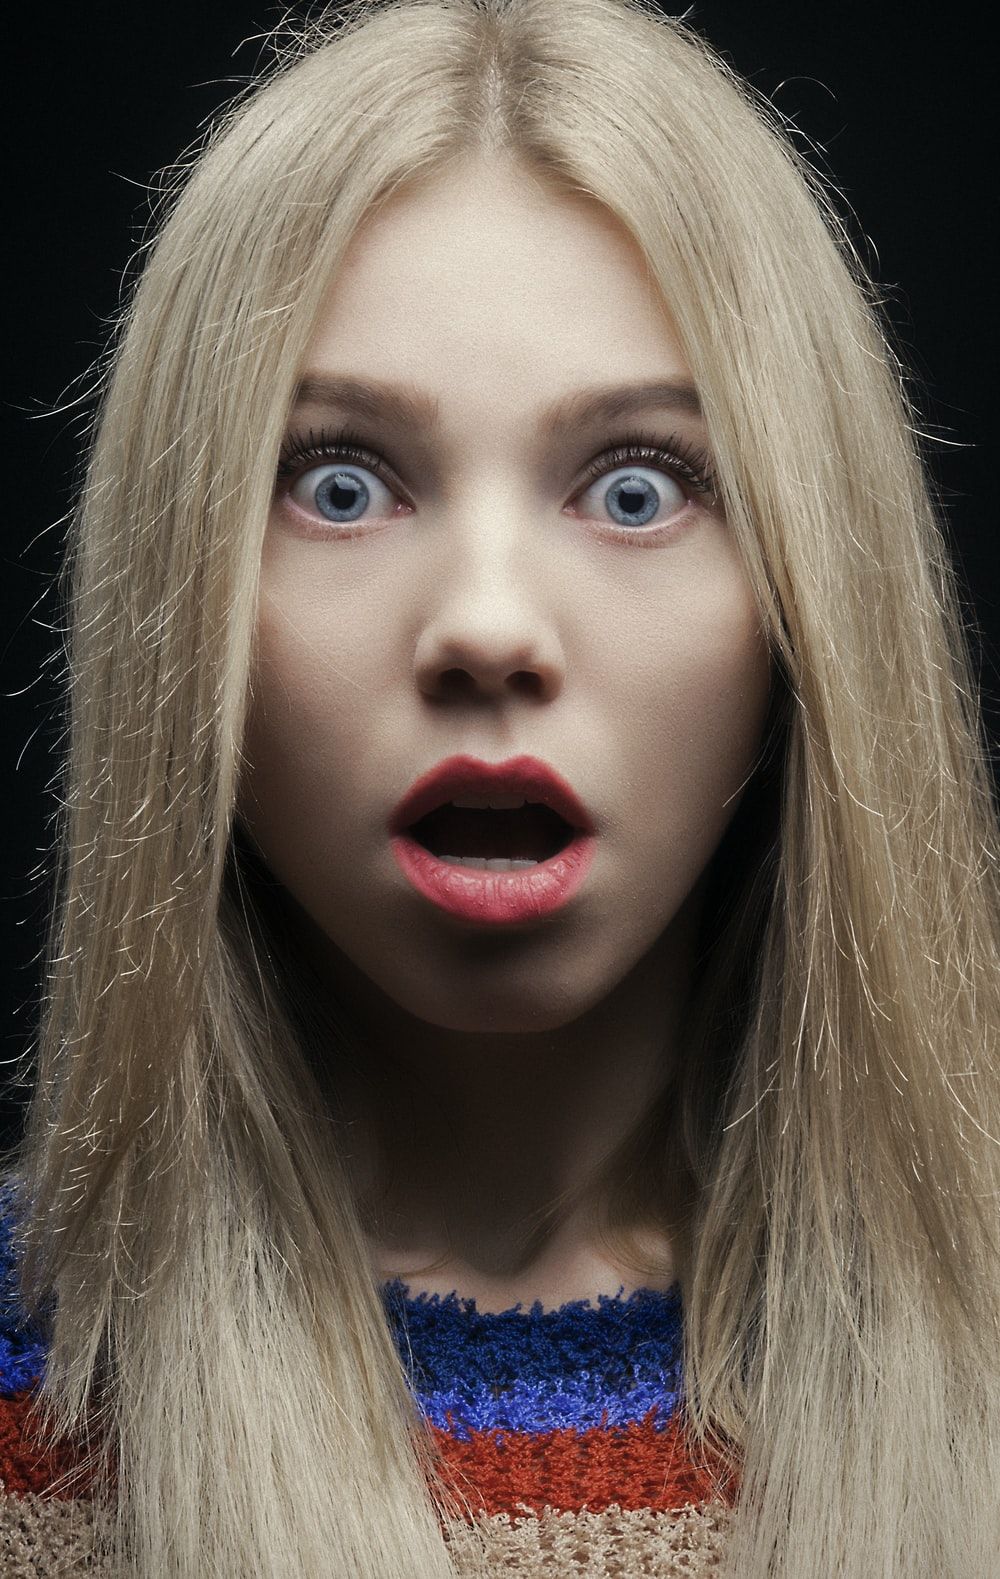 Shocked Face Picture. Download Free Image